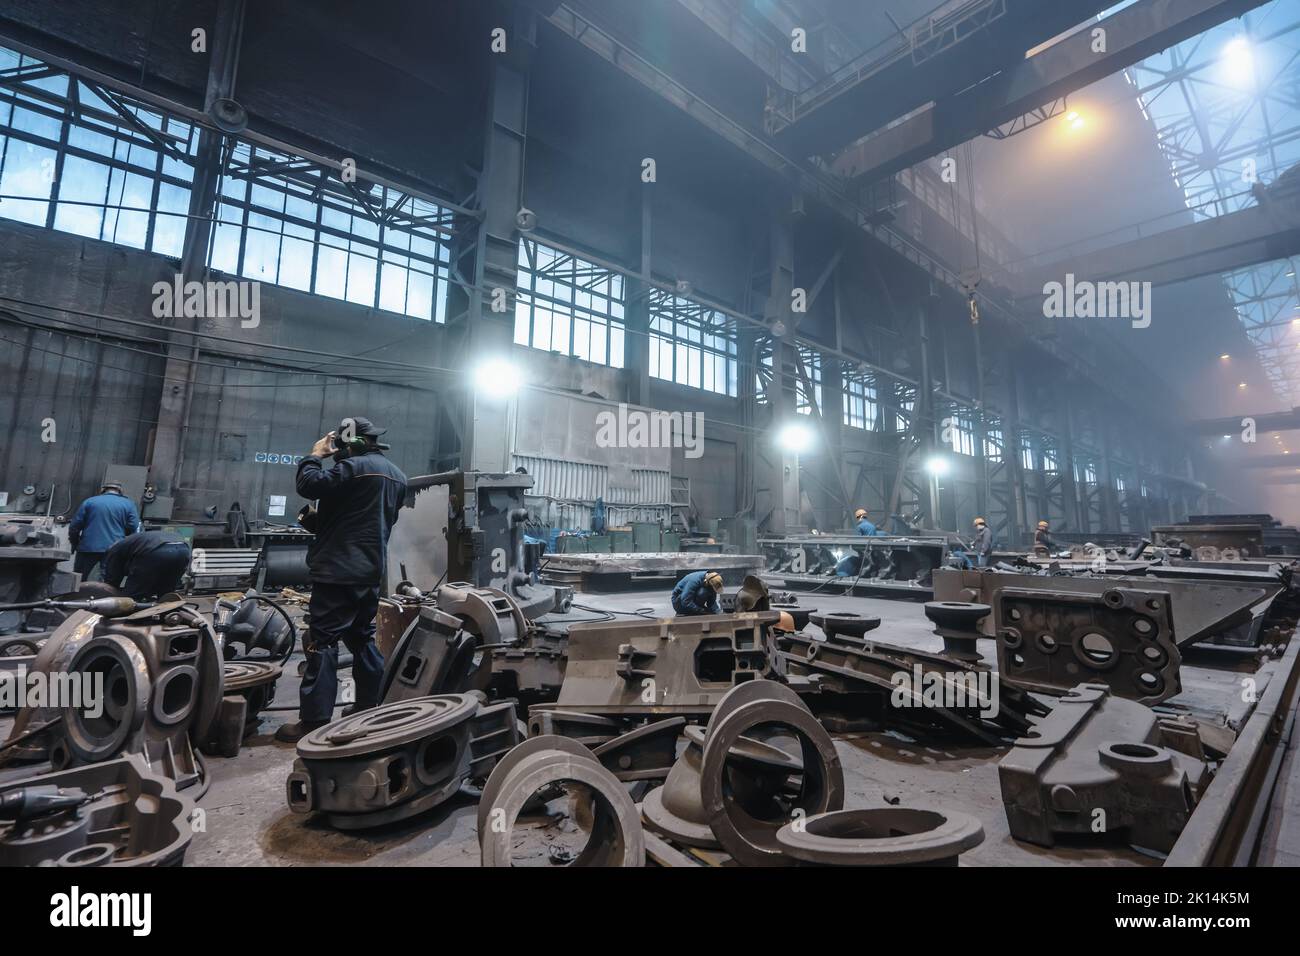 Metallurgical plant. Industrial steel production. Interior of metallurgical workshop. Stock Photo